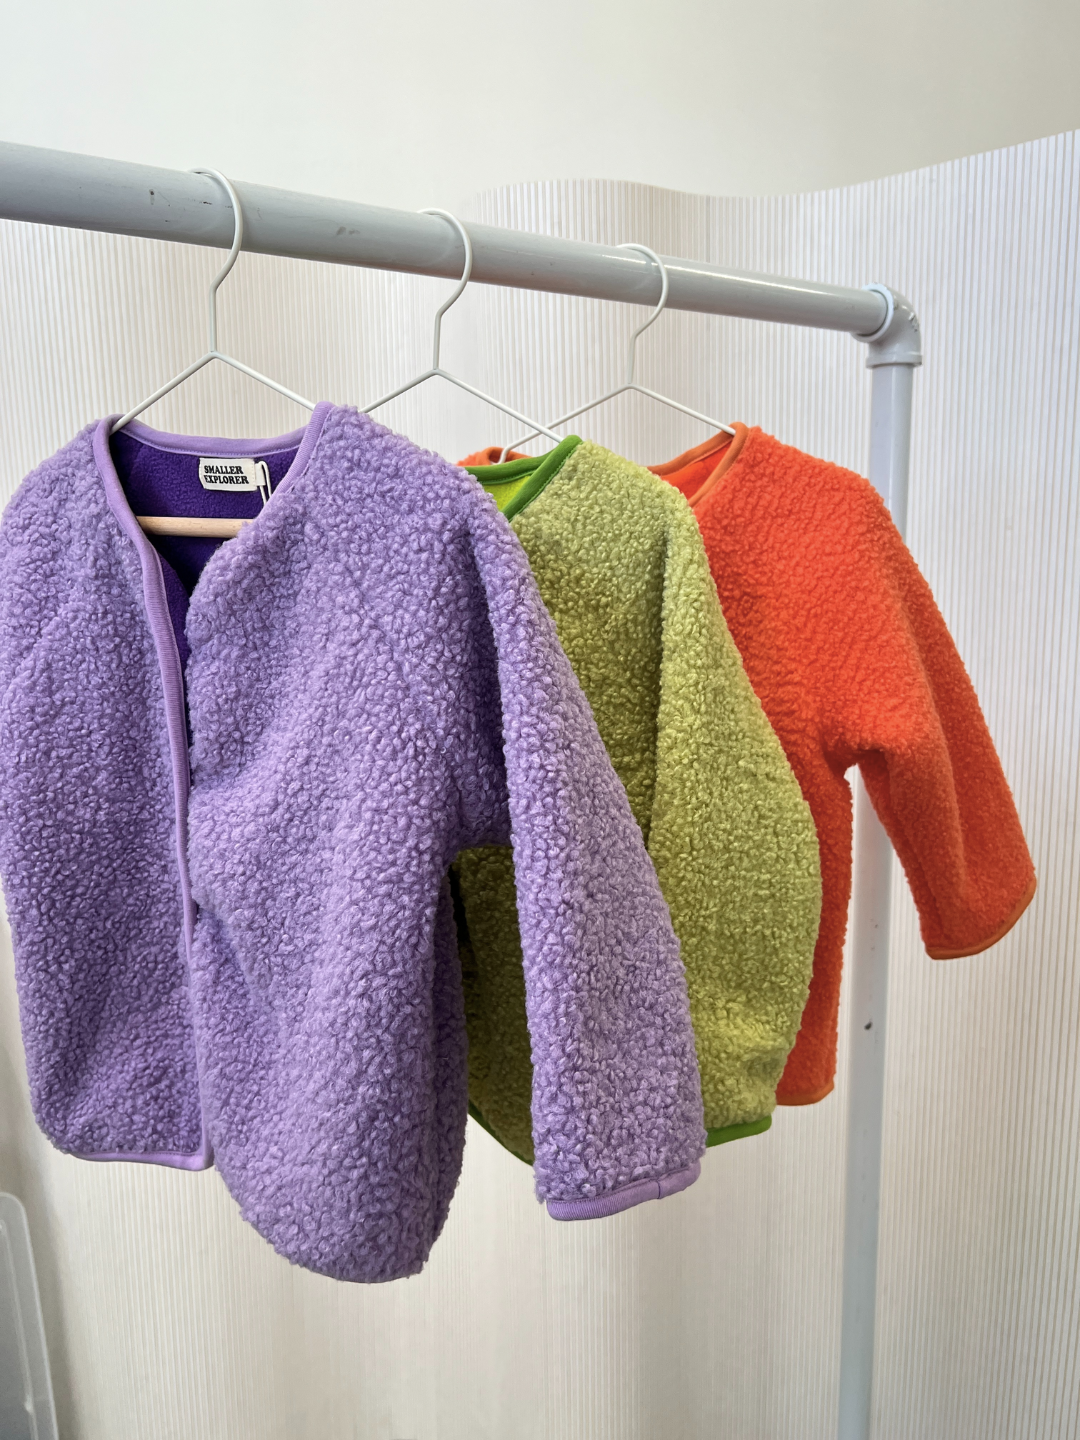 Three kids collarless fleece jackets hand on a white garment rack, on white hangers, in a white room. The jackets are purple, light green, and orange.